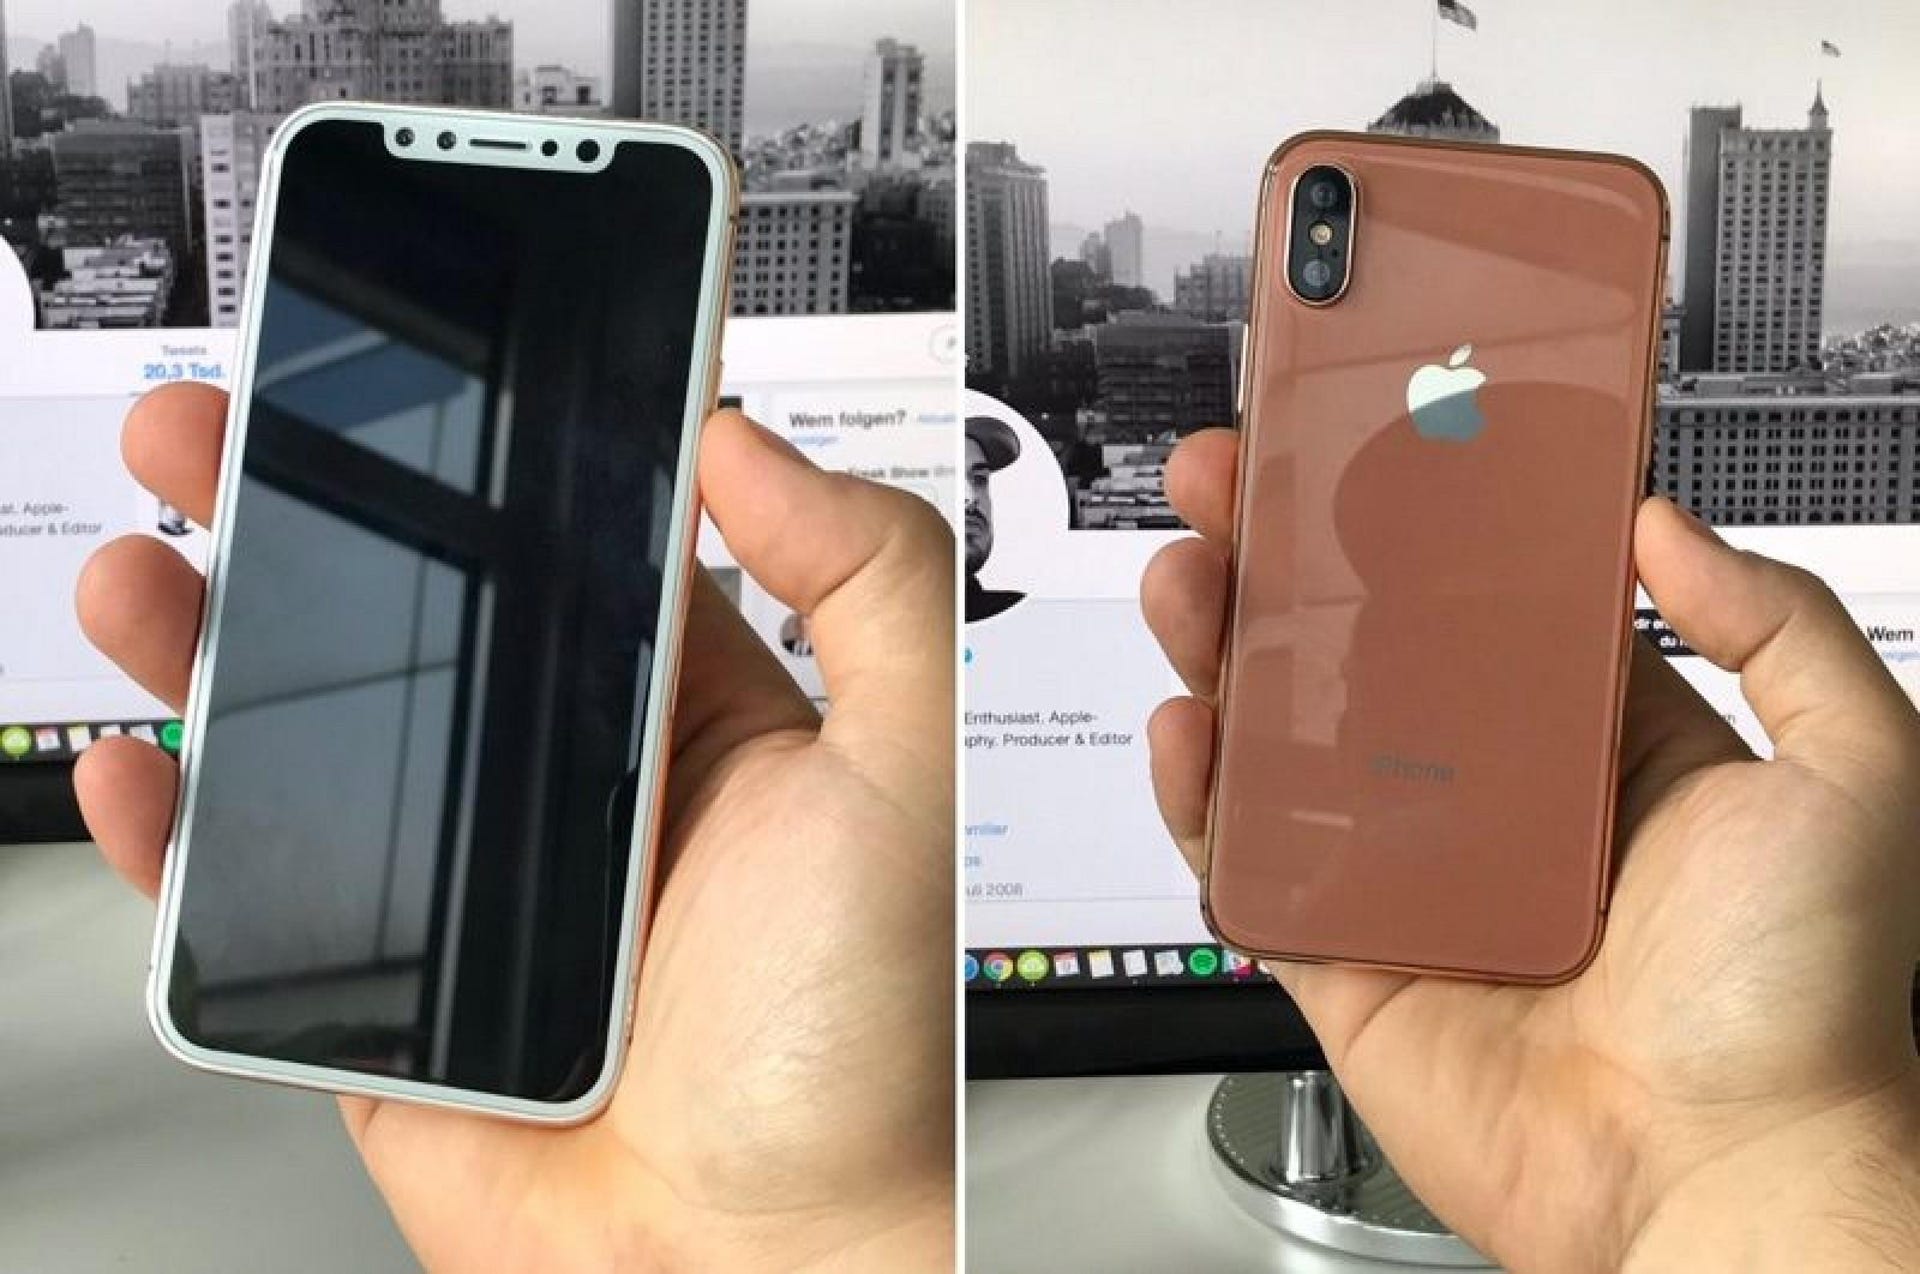 The iPhone 8 dummy